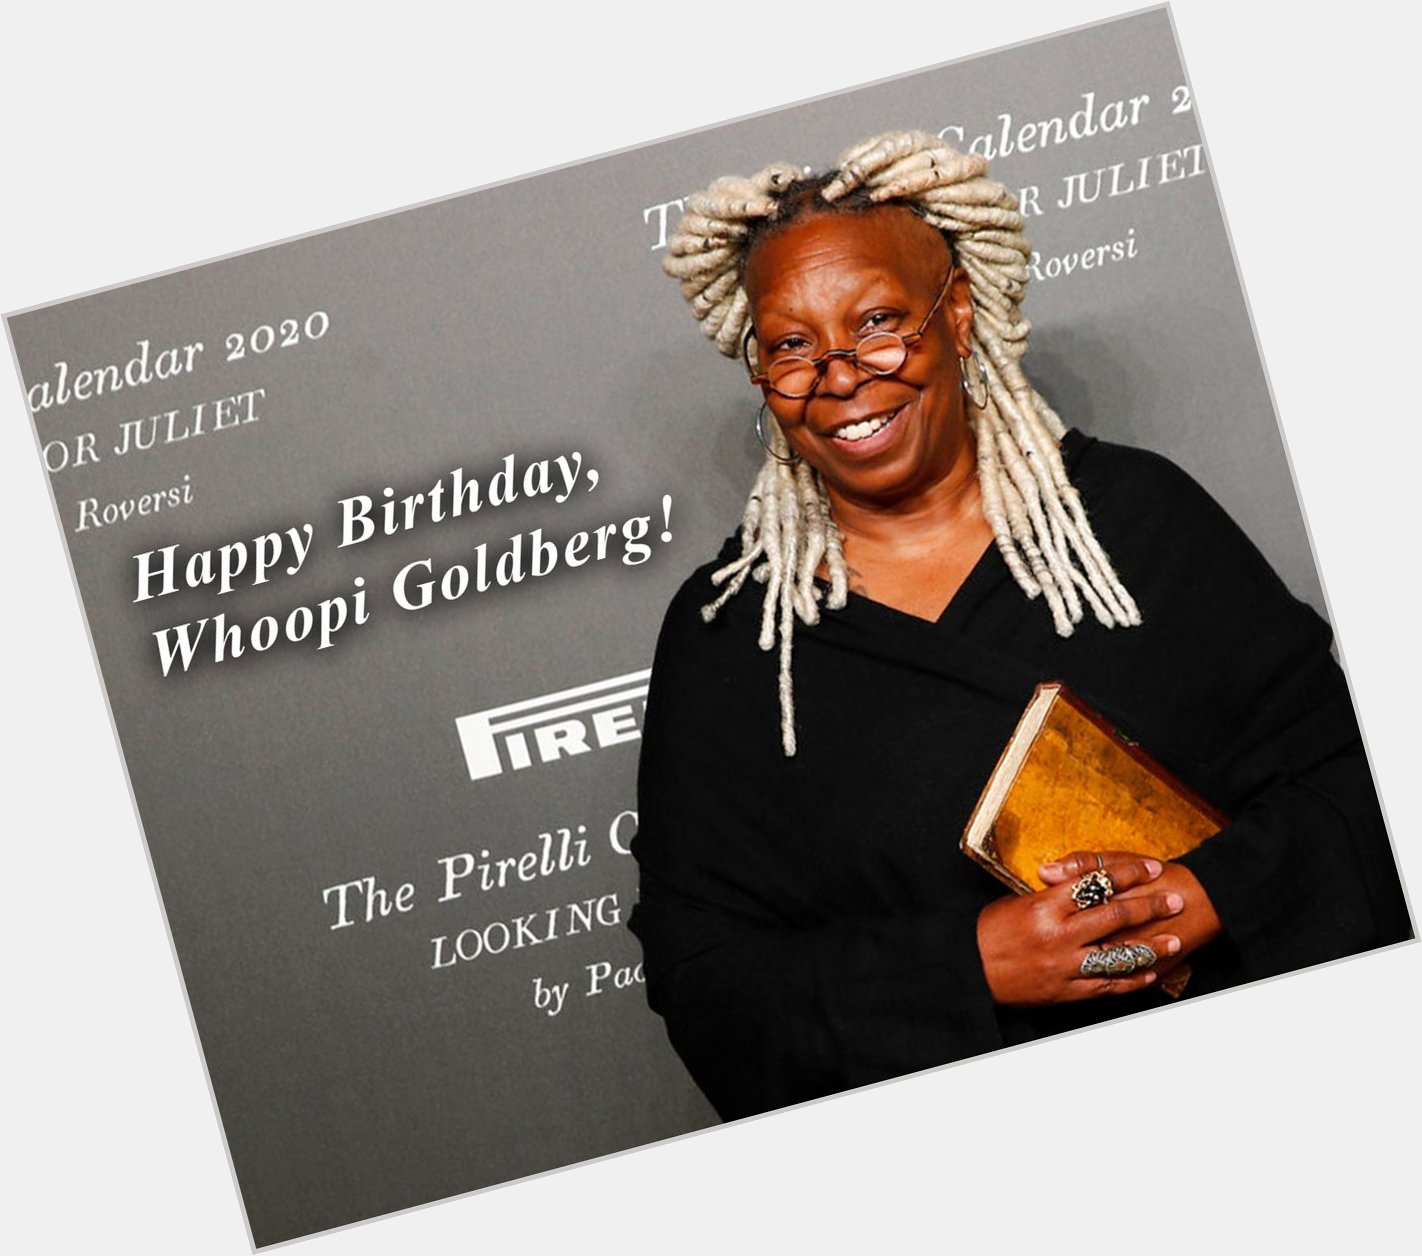 Happy birthday, Whoopi Goldberg! The actress, comedian, and talk show host turns 66 today.  